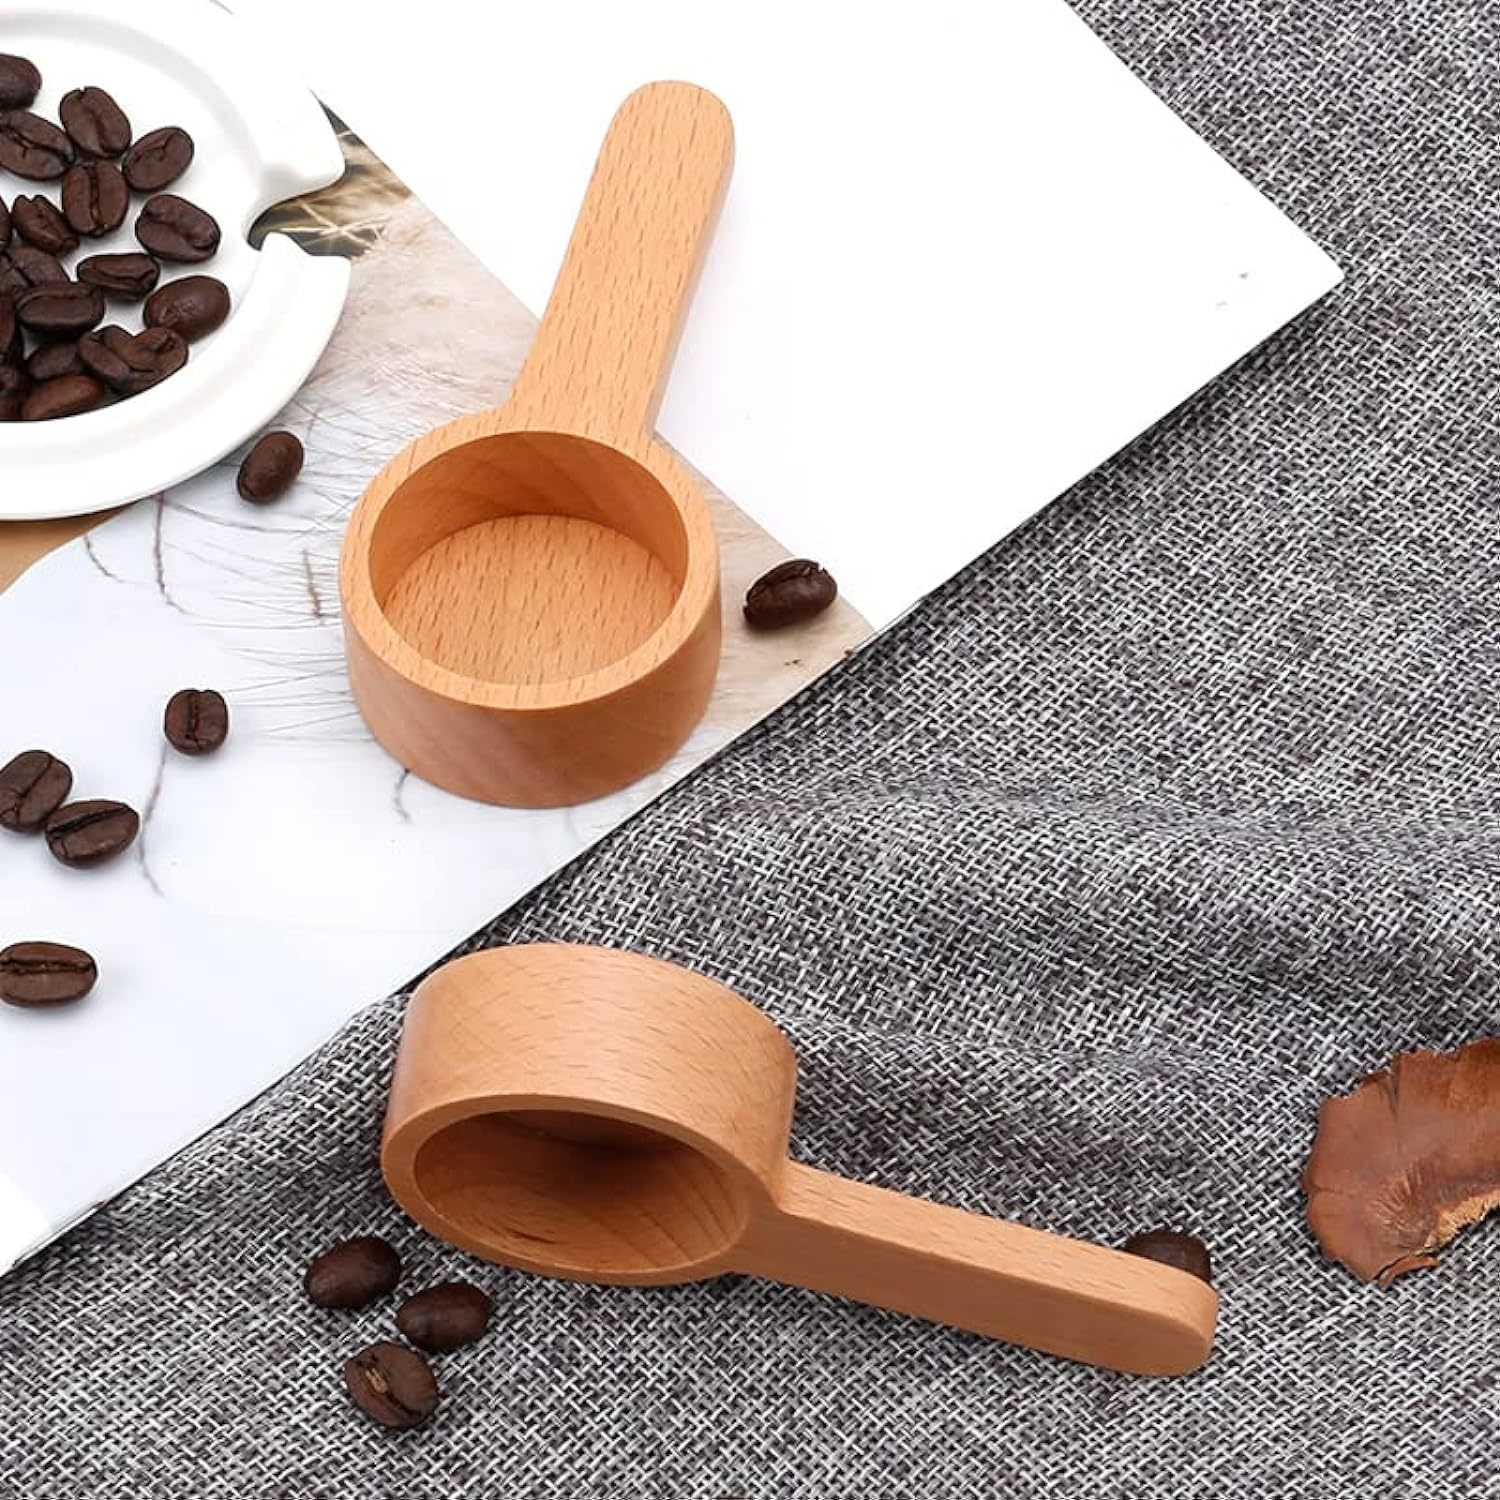 Mr. Woodware mr.woodware 2 pcs wooden scoops - 6 inch natural beech wood  measuring mini scoop set for coffee, flour, sugar, spice, powder